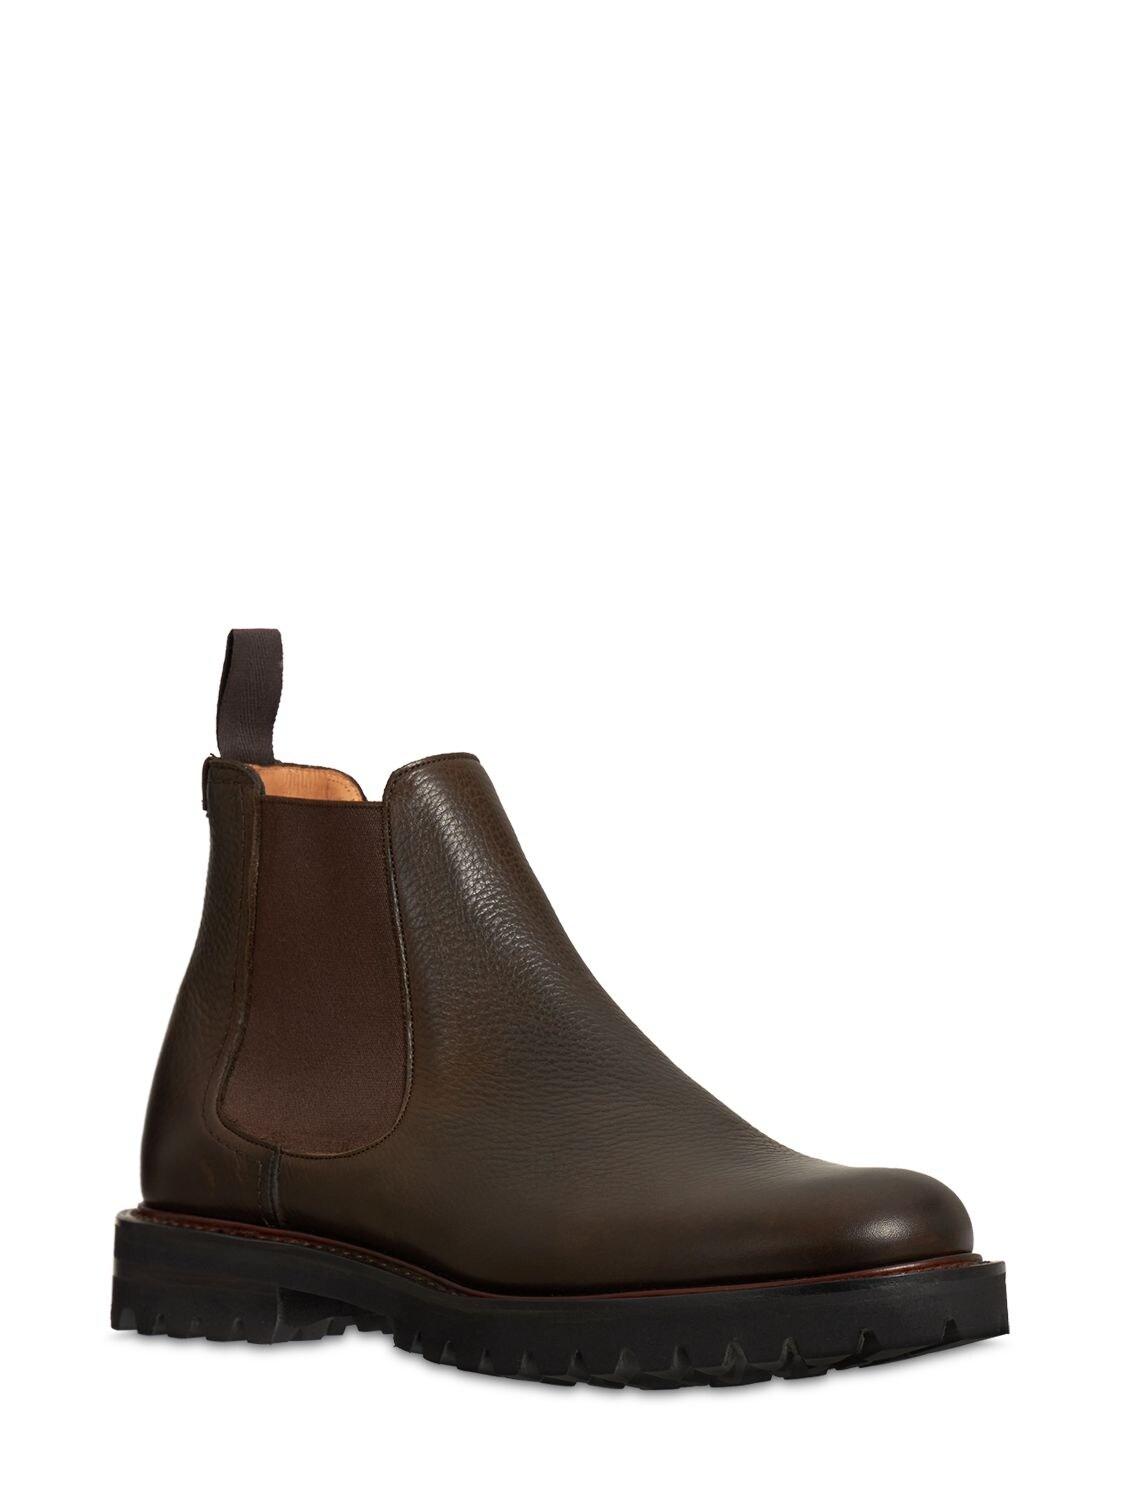 Church's Cornwood Grained Leather Chelsea Boots in Brown for Men - Lyst